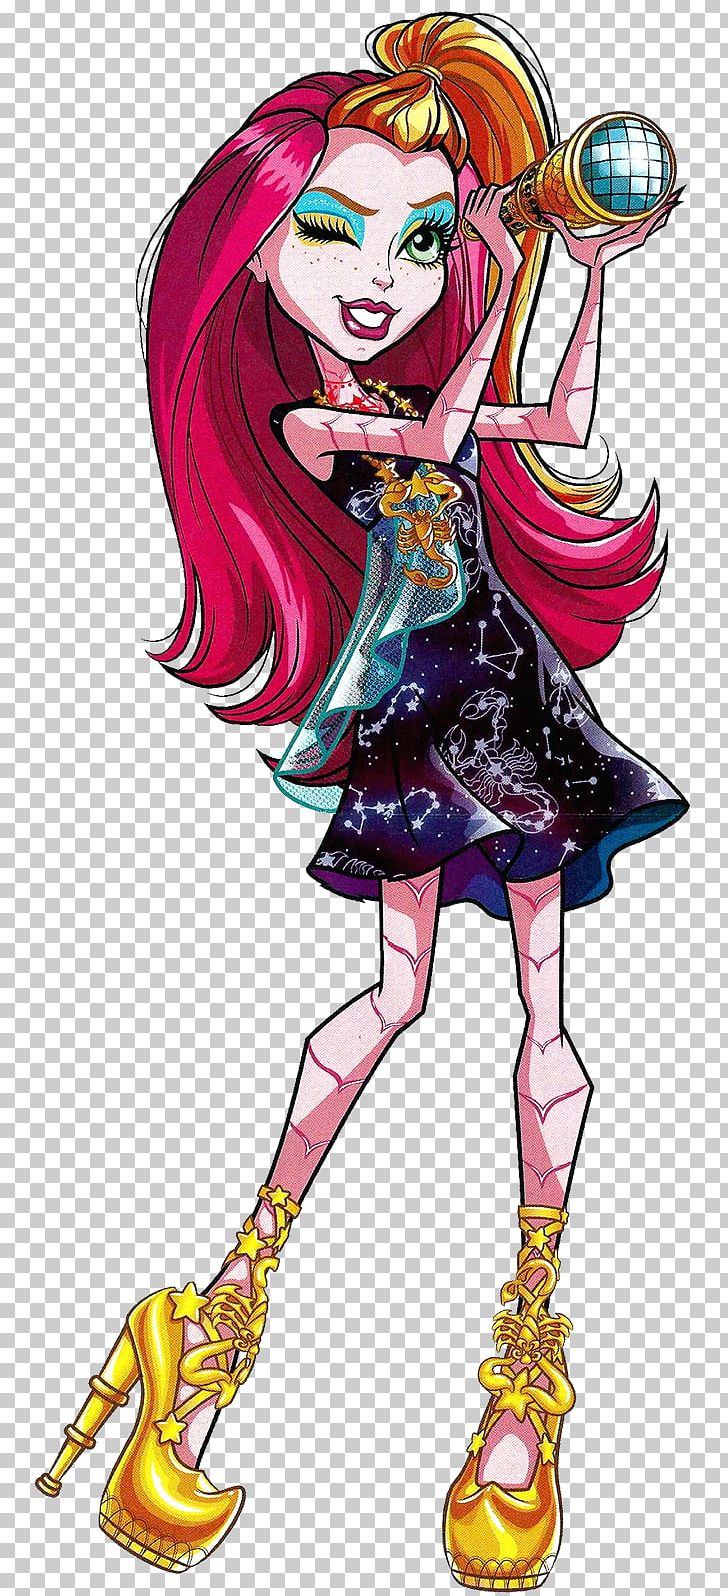 Monster High: 13 Wishes Monster High Gigi Grant Doll Toy PNG, Clipart, Bratz, Cartoon, Doll, Fashion Illustration, Fictional Character Free PNG Download